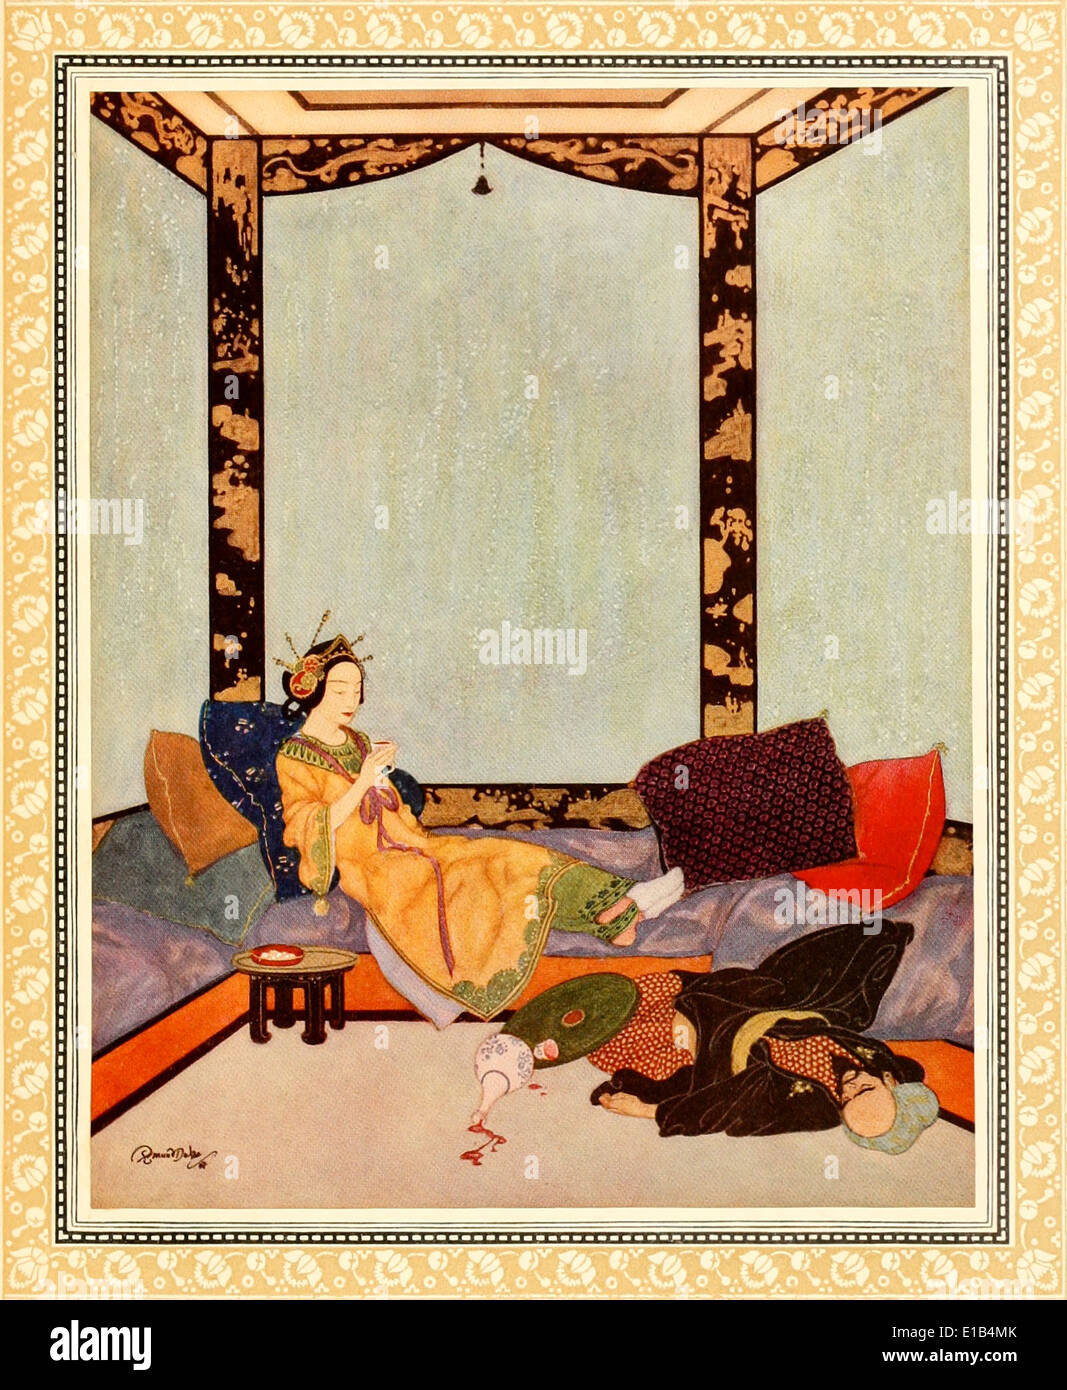 Edmund Dulac (1882-1953) illustration from ‘Sinbad the Sailor & Other Stories from the Arabian Nights’. Lady Bedr-el-Buldur Stock Photo